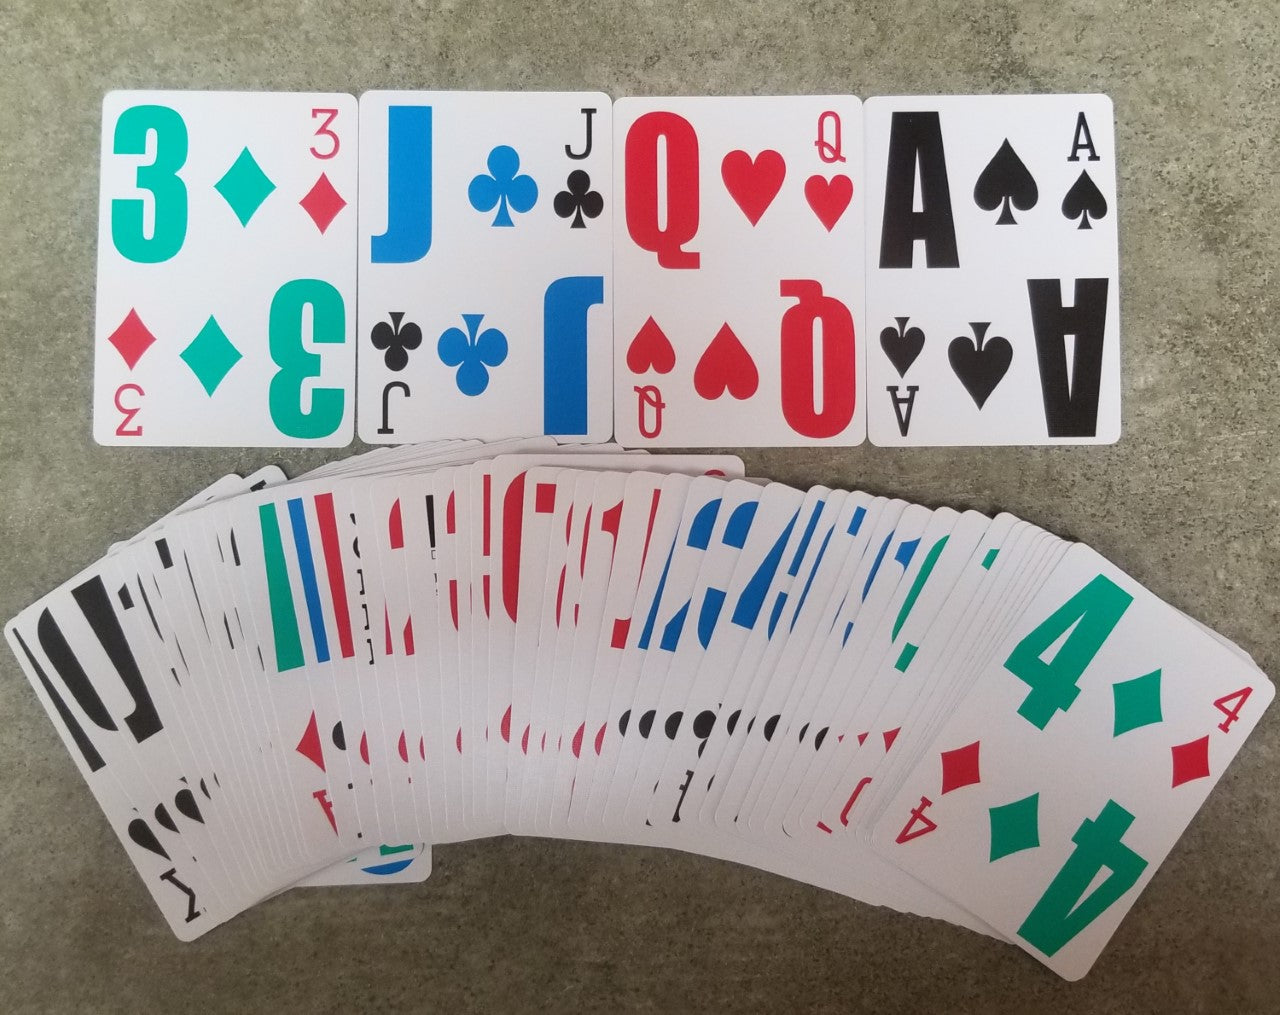 Playing cards with white backgrounds and multi colored large print text